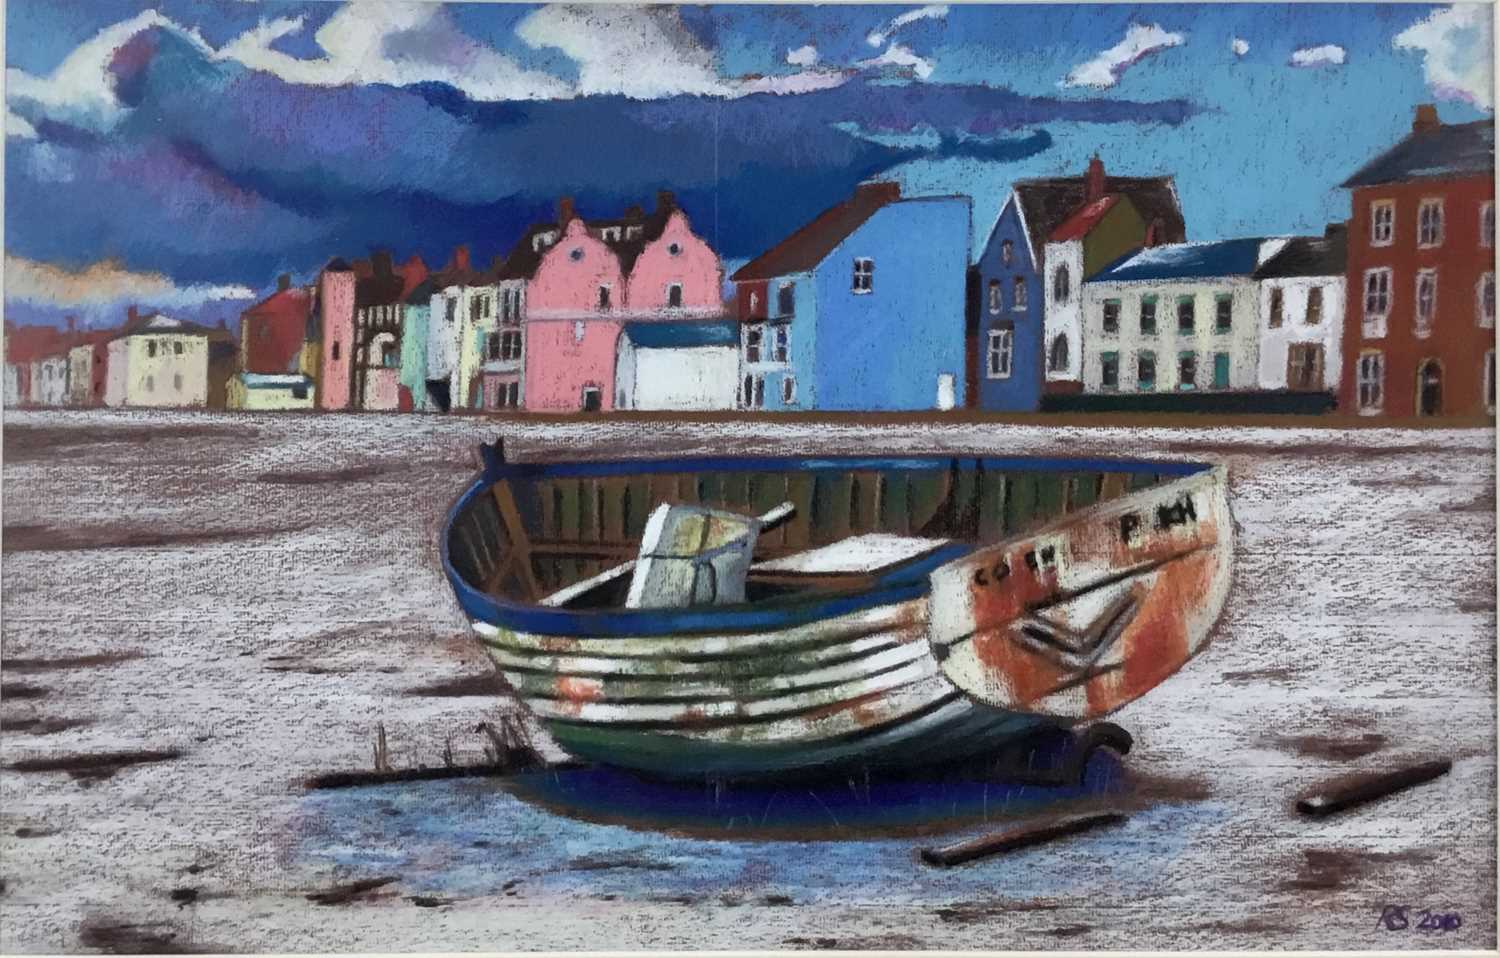 Lot 127 - Richard Stockings, contemporary, pastel - Fishing Boat at Aldeburgh, initialled and dated 2010